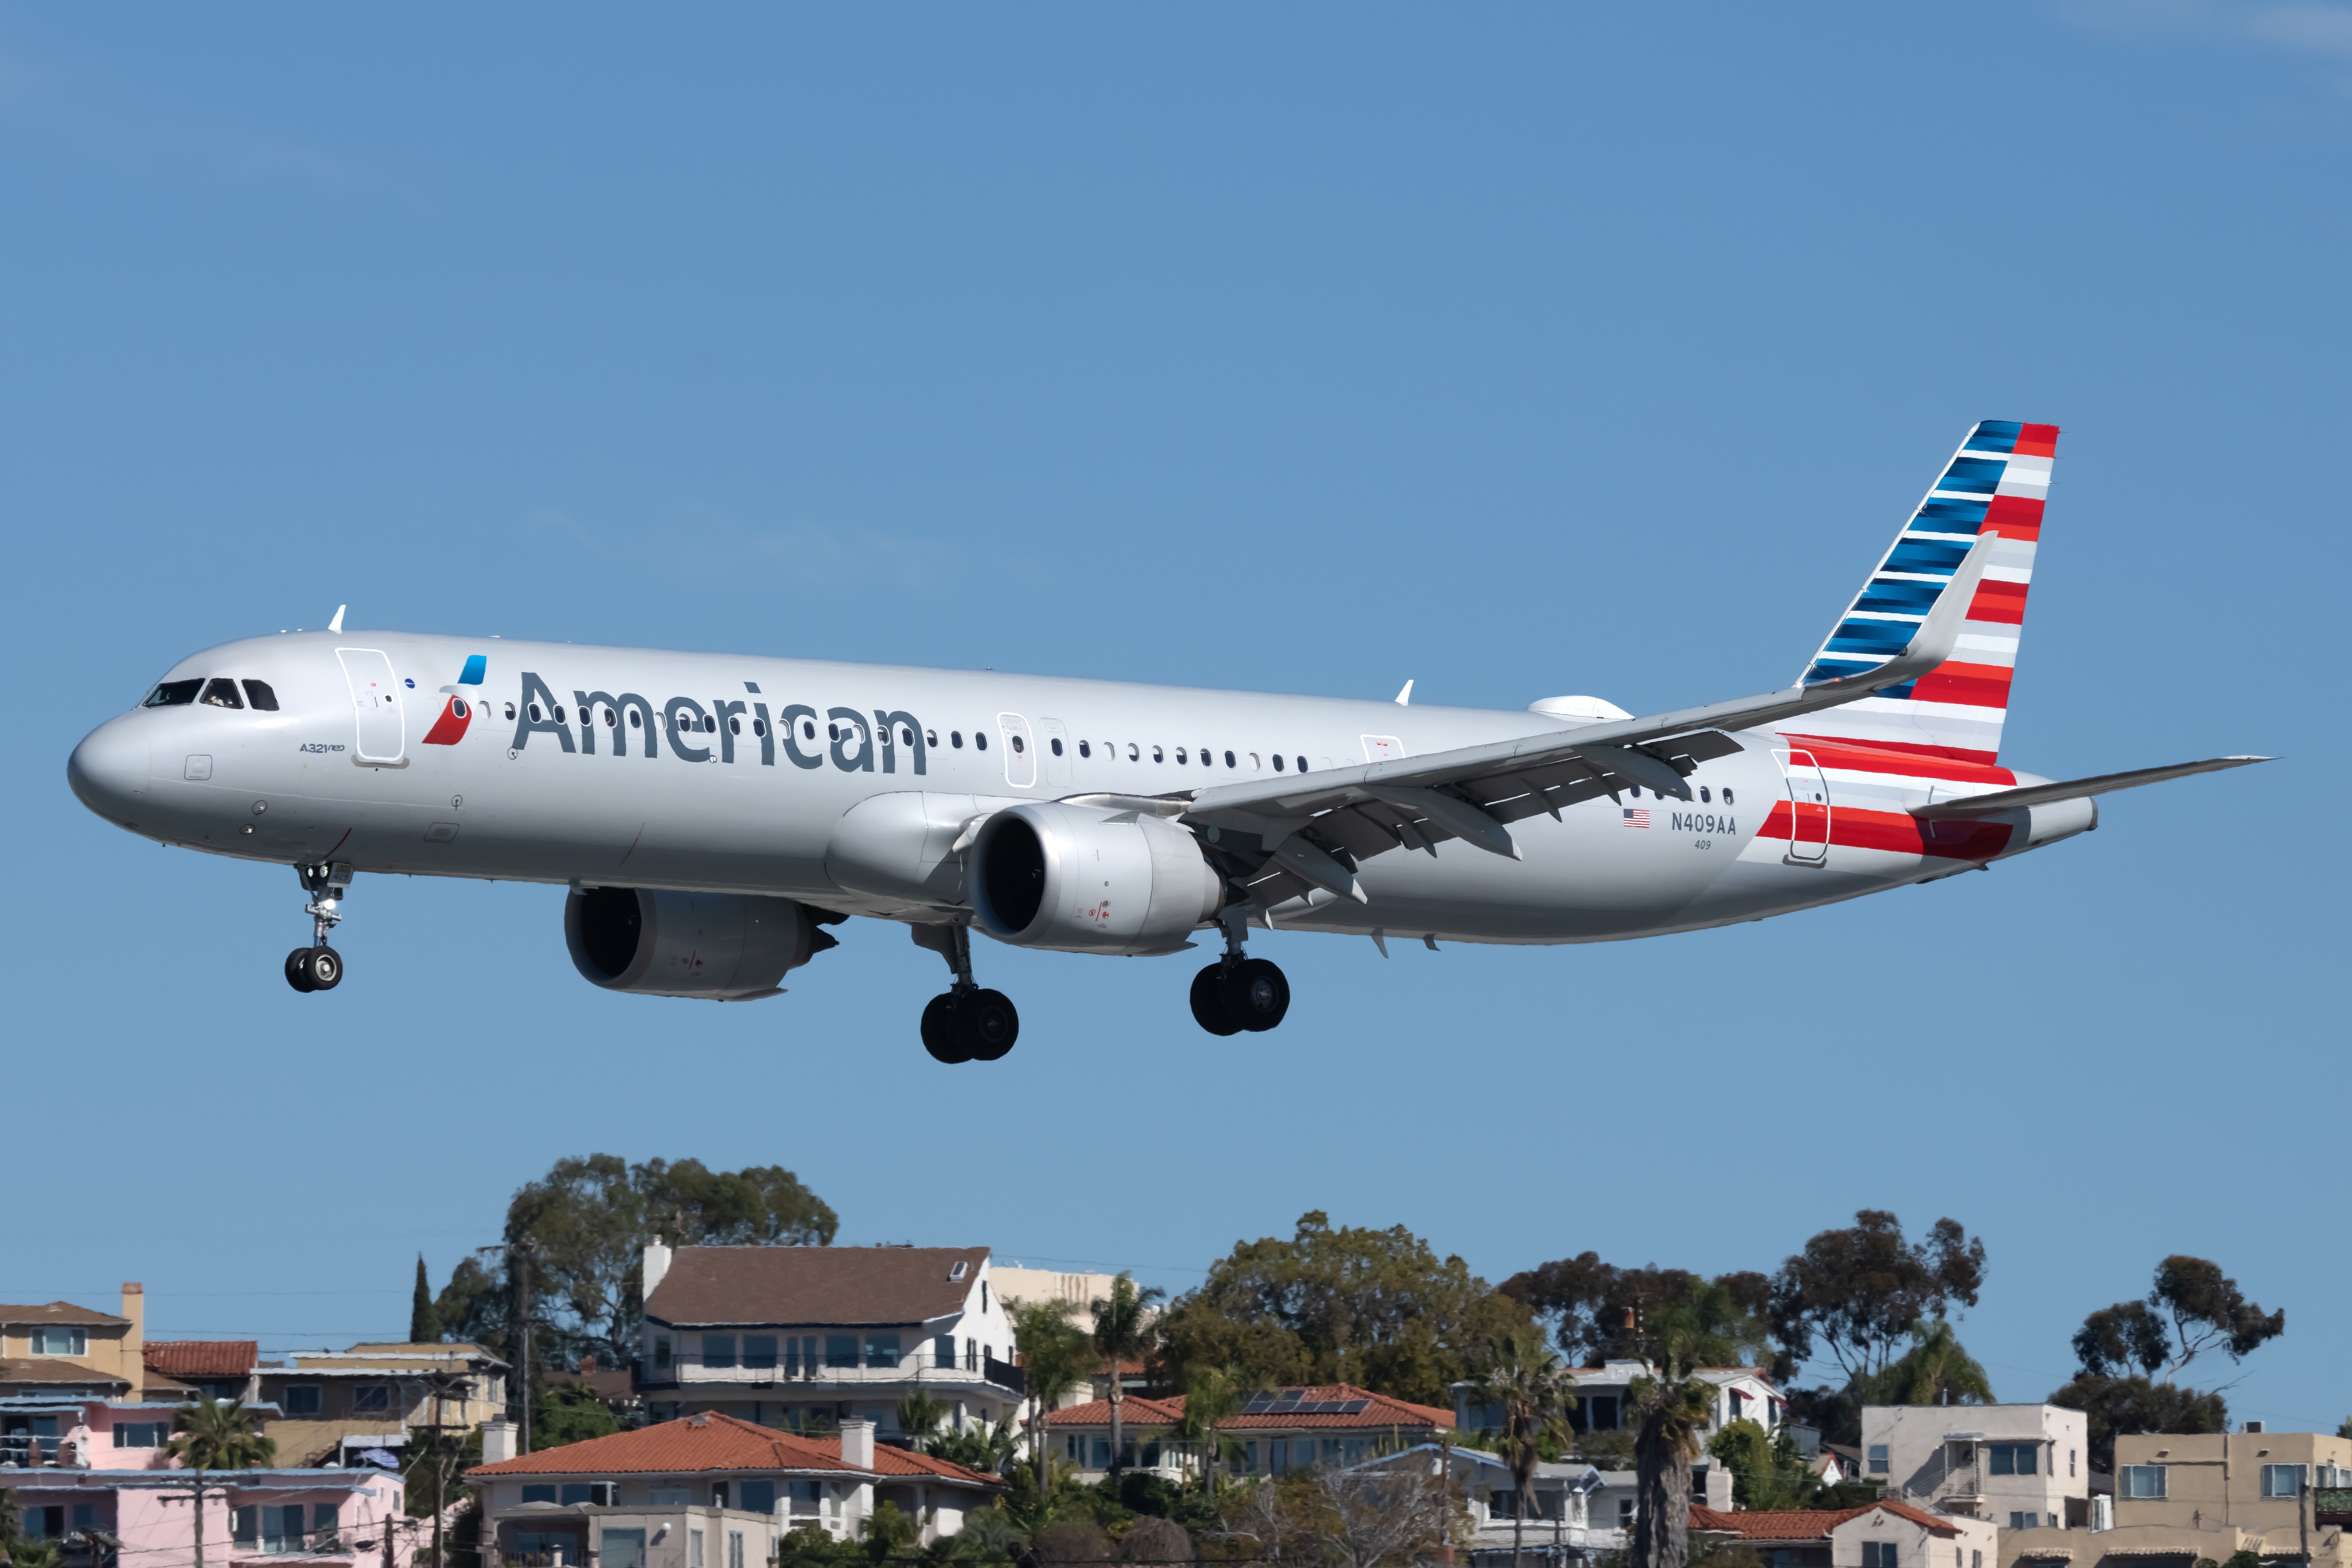 An American Airlines Airbus A321-253NX flying close to the ground.